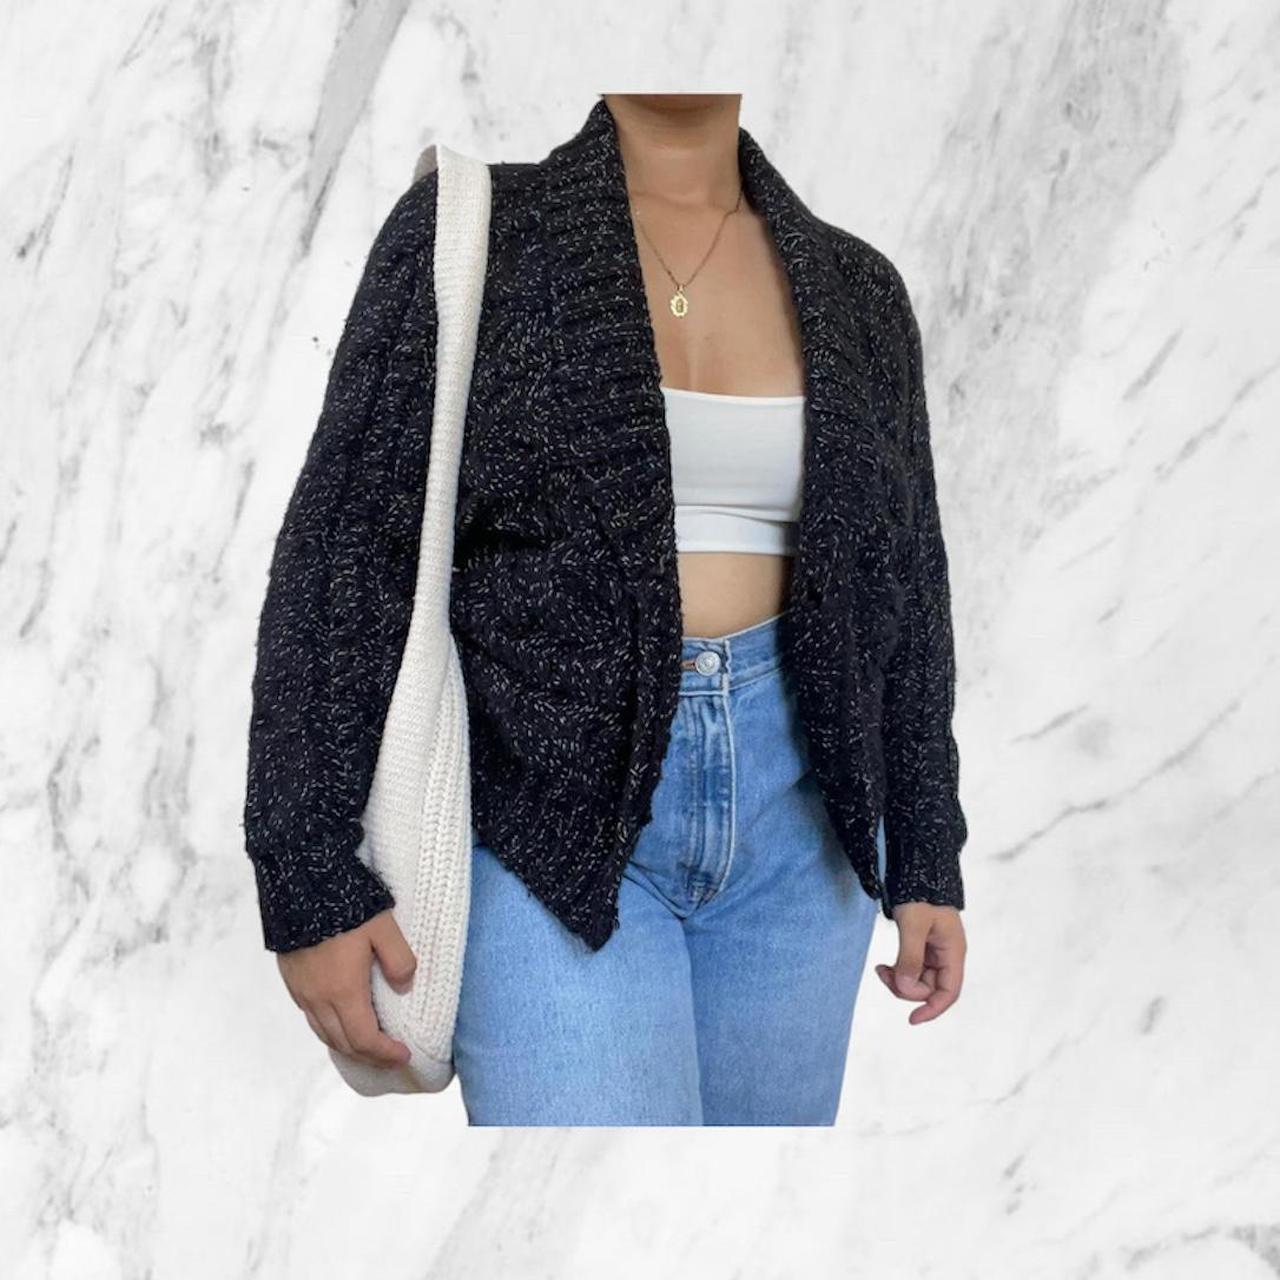 Product Image 4 - Black Cable Knit Cardigan🌻

❀ labeled